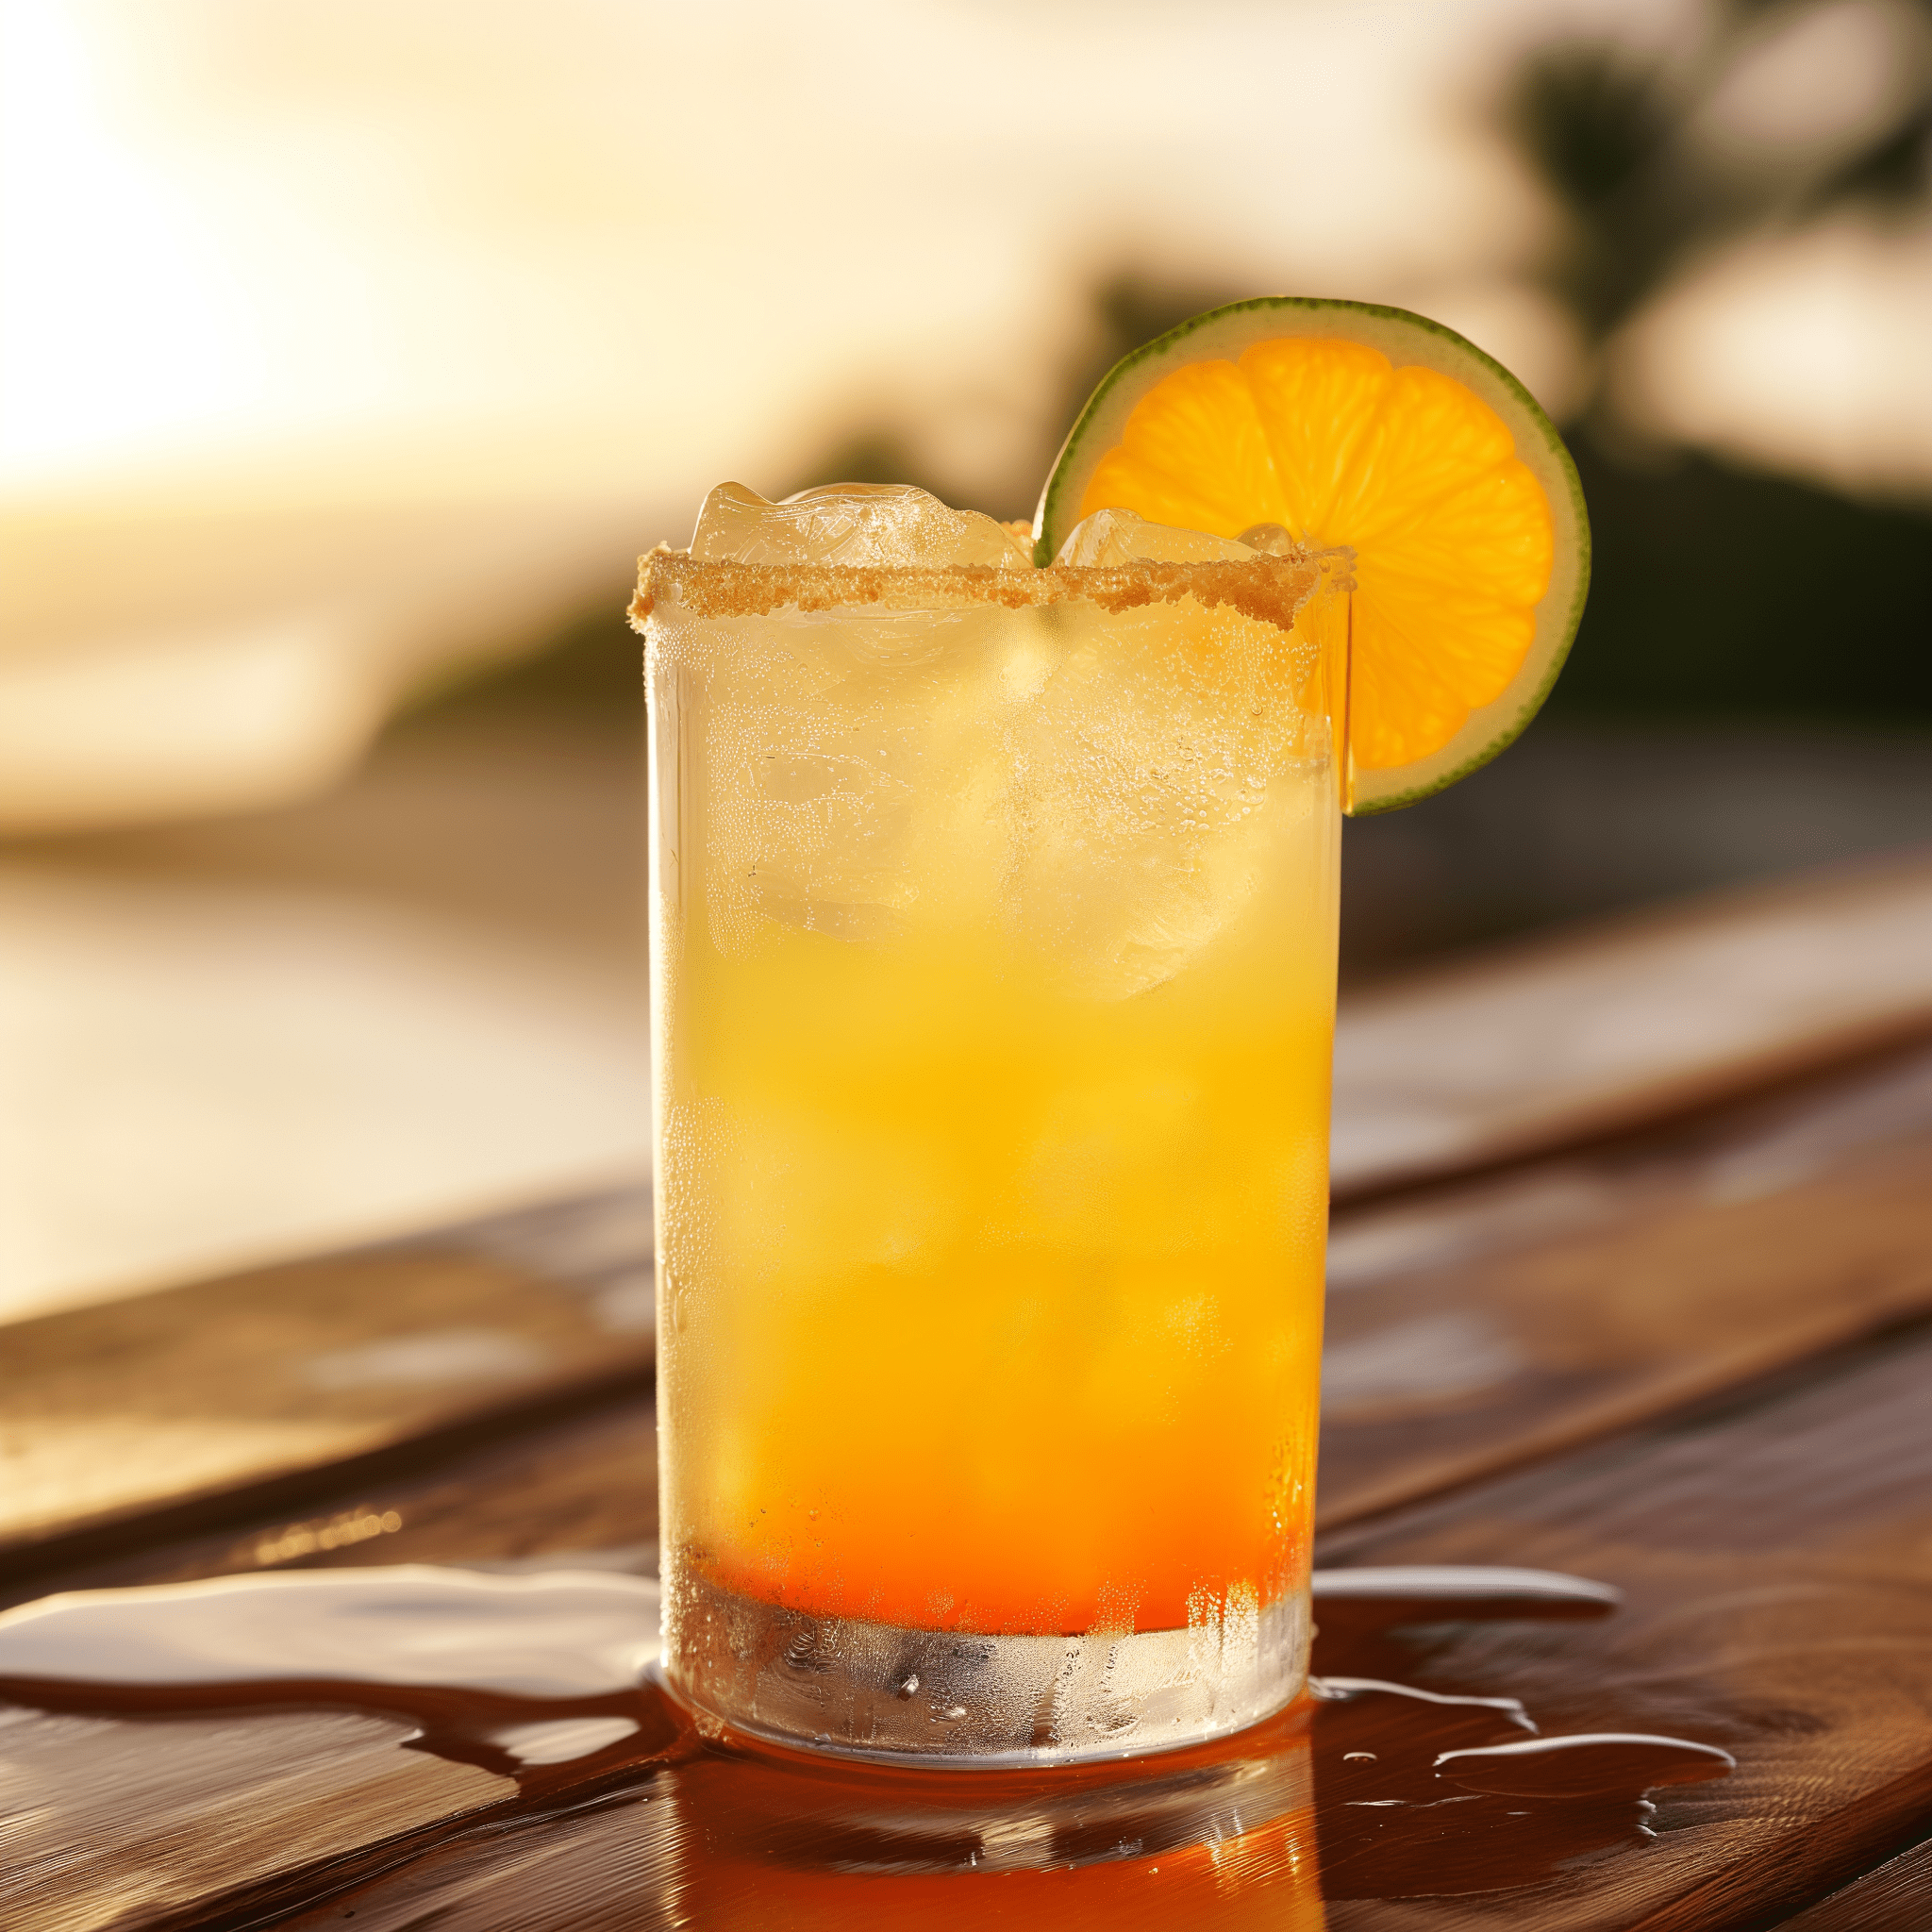 Citrus Rum Cooler Cocktail Recipe - The Citrus Rum Cooler is a delightful blend of tangy and sweet, with the zesty flavors of lime and orange shining through. The light rum provides a smooth base without overpowering the fresh citrus notes, while the triple sec adds a hint of complexity. It's a refreshing, light, and slightly sweet cocktail with a pleasantly sour finish.